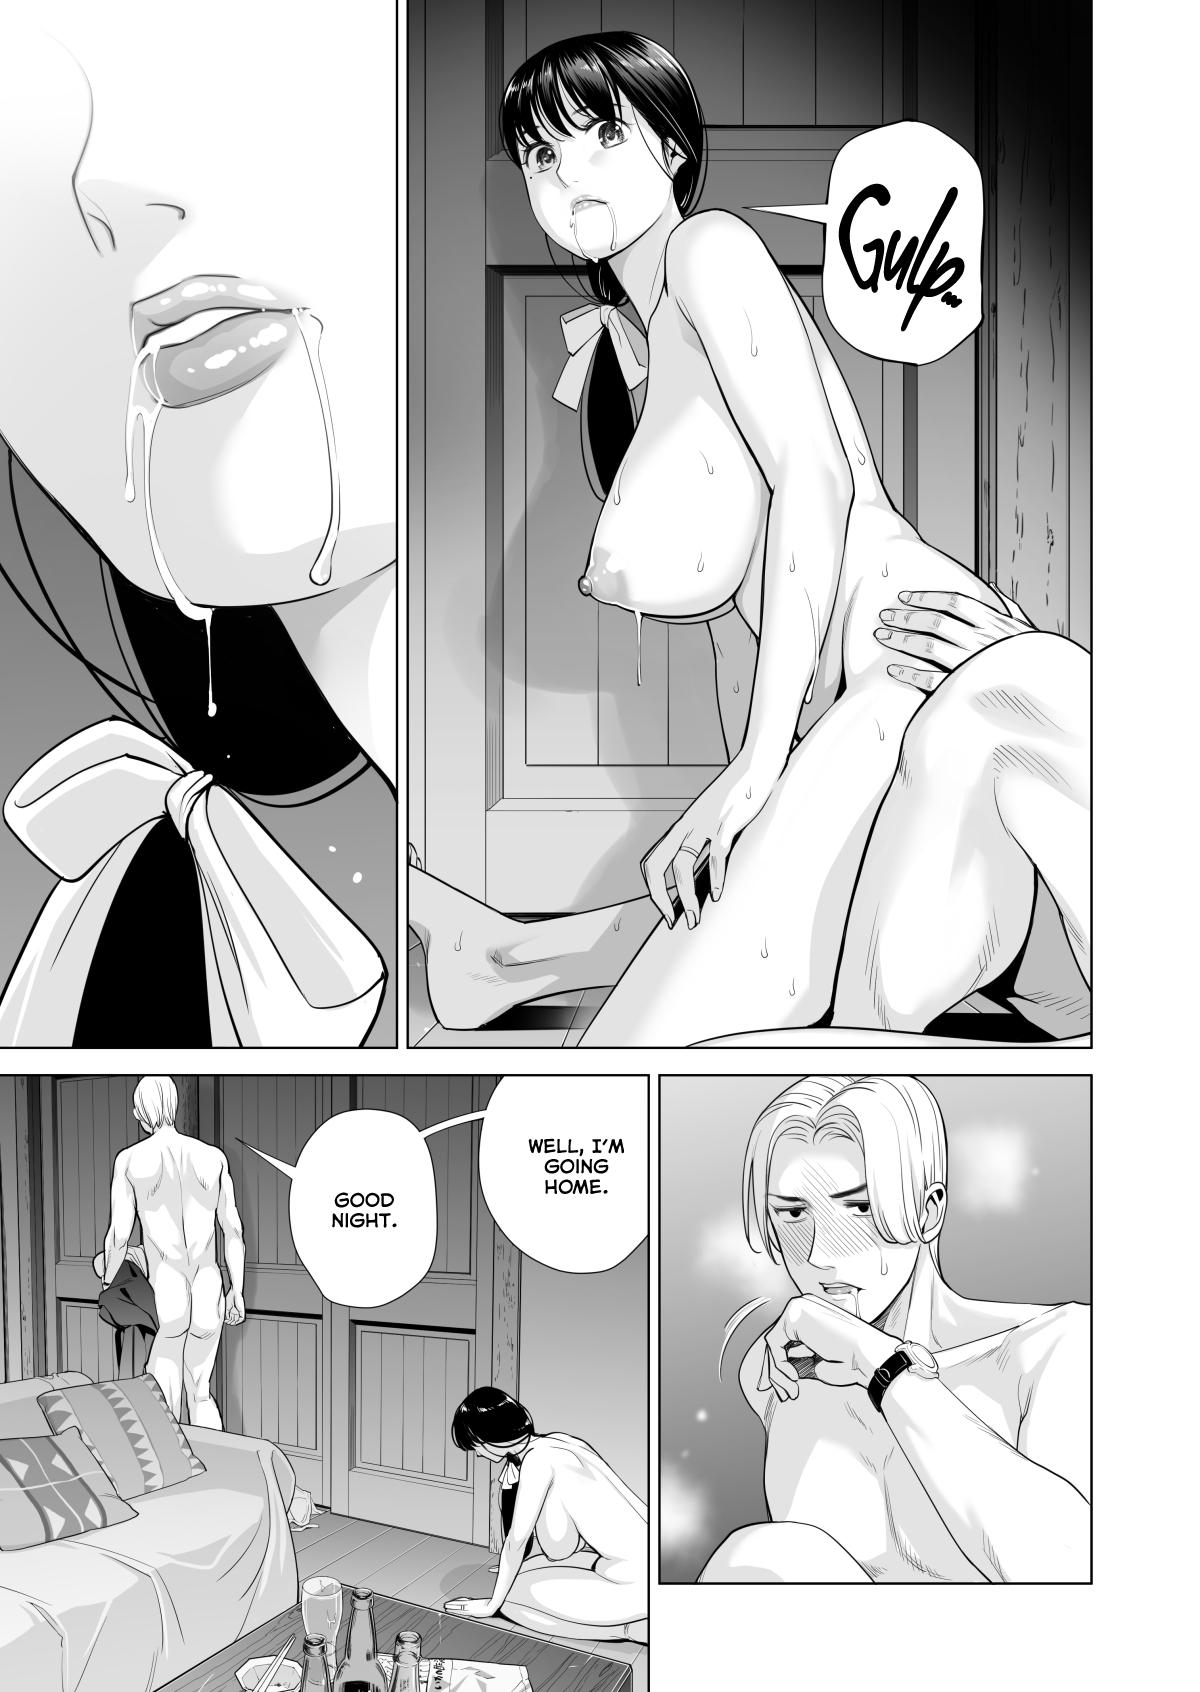 [HGT Lab (Tsusauto)] Tsukiyo no Midare Zake (Zenpen) Moonlit Intoxication ~ A Housewife Stolen by a Coworker Besides her Blackout Drunk Husband ~ Chapter 1 [English] 59